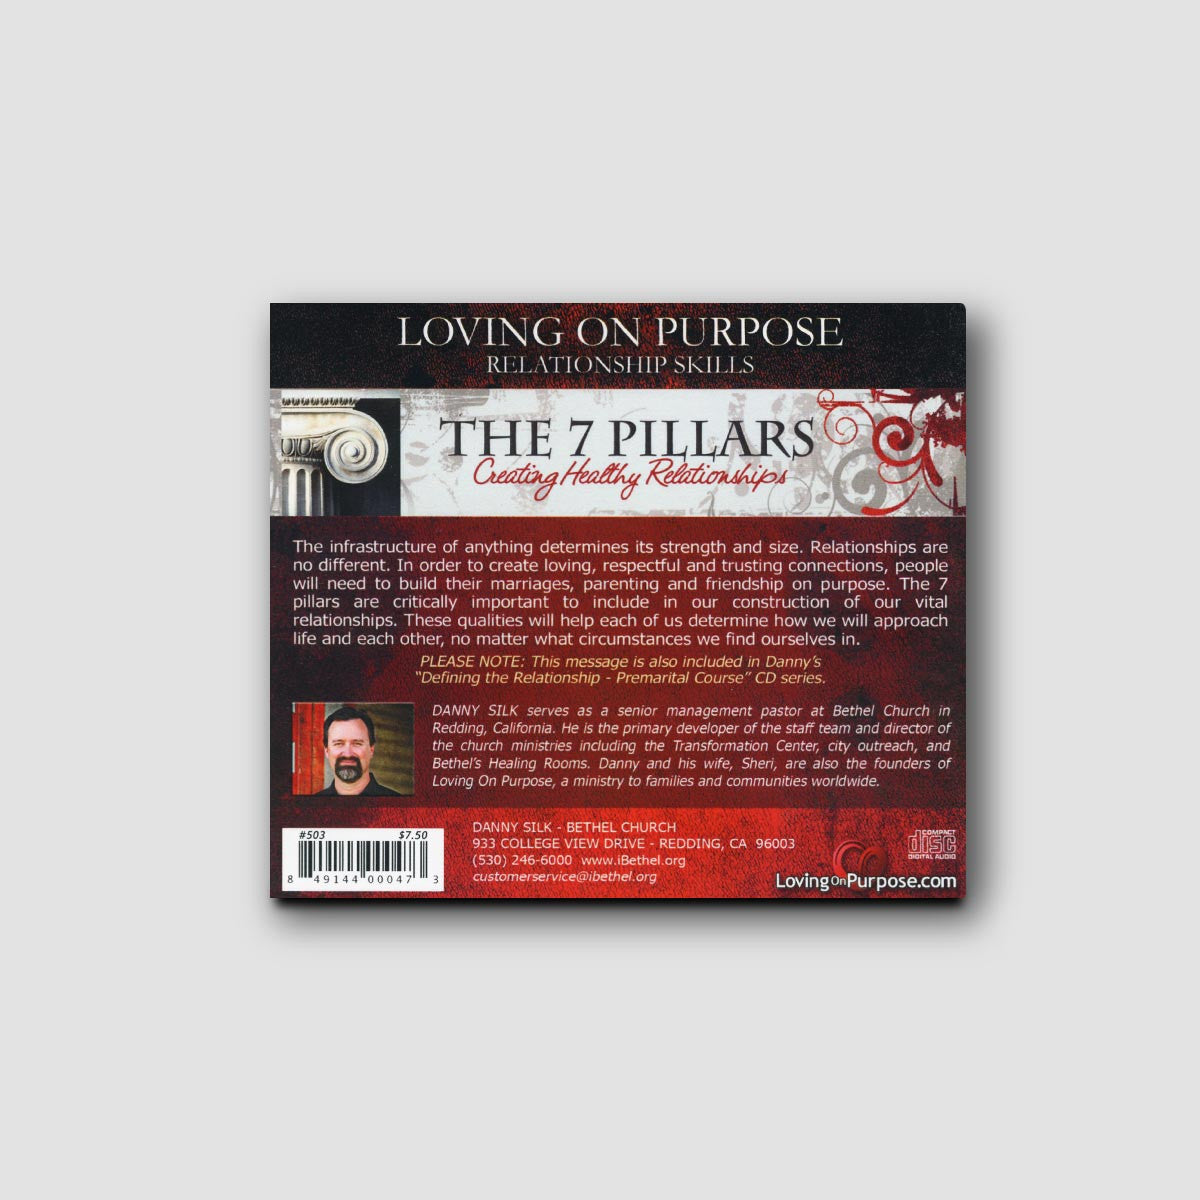 The 7 Pillars: Creating Healthy Relationships